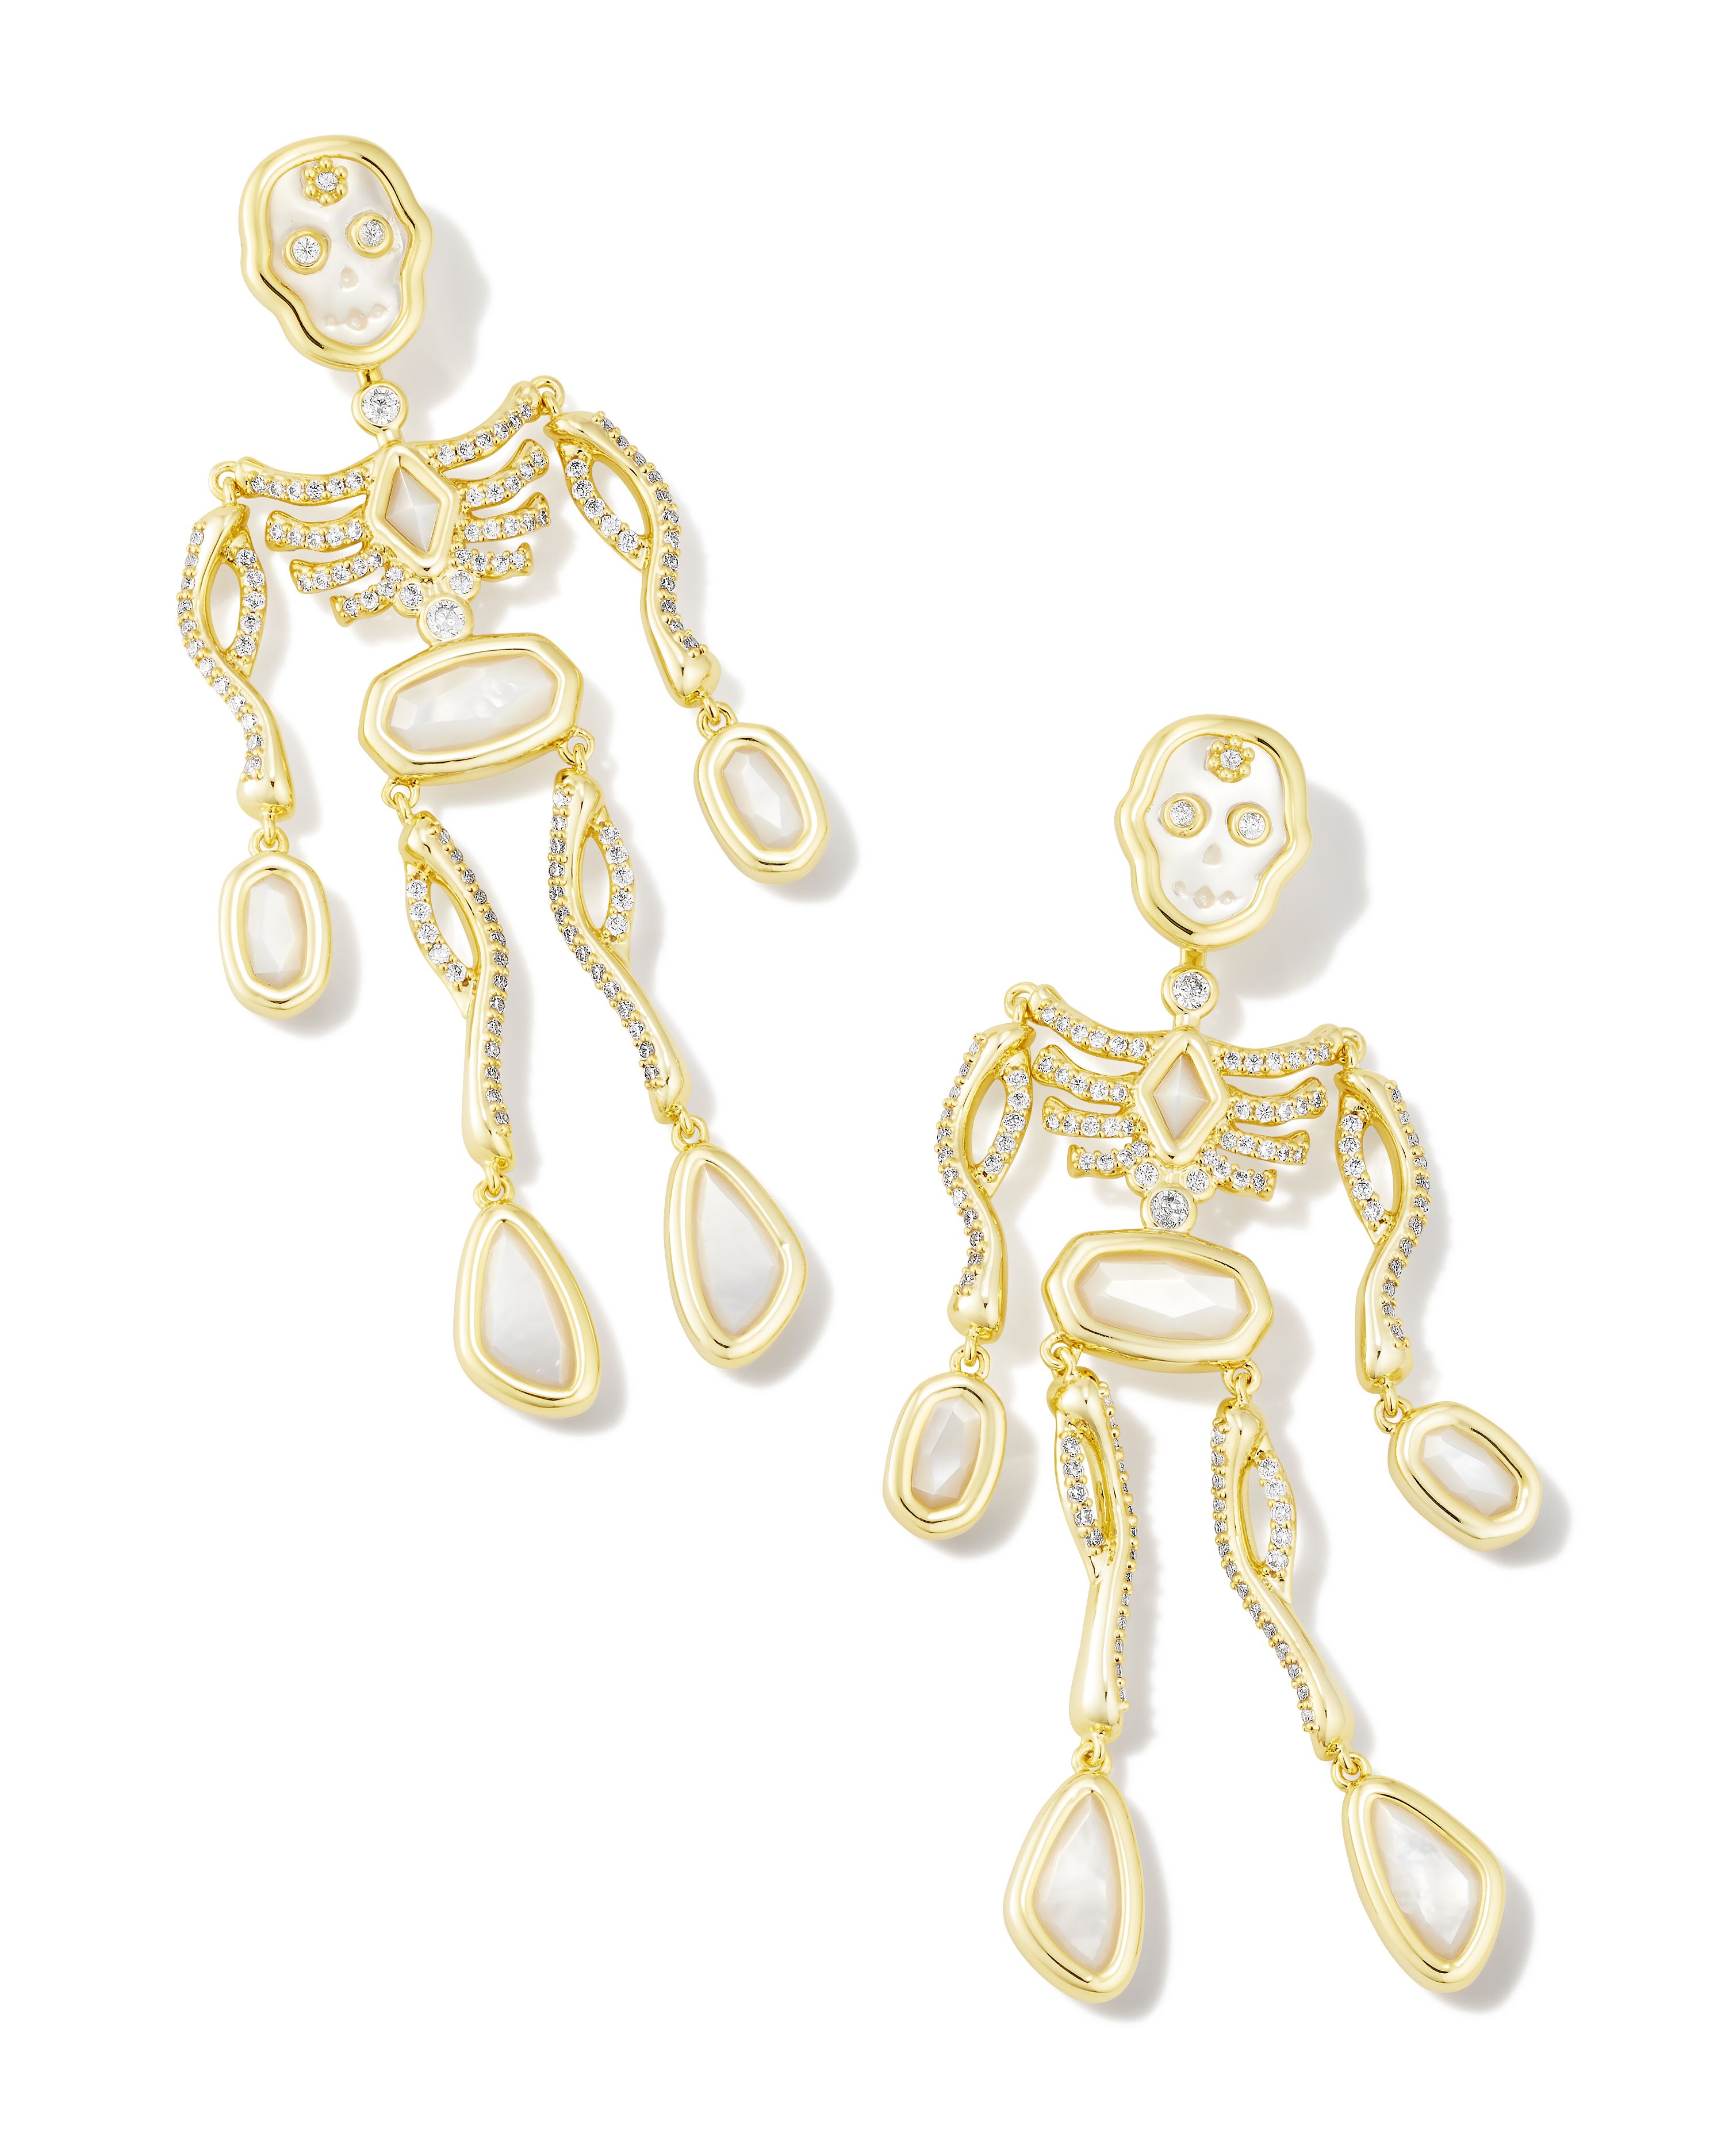 Skeleton Convertible Gold Statement Earrings in Ivory Mother-of-Pearl | Kendra Scott